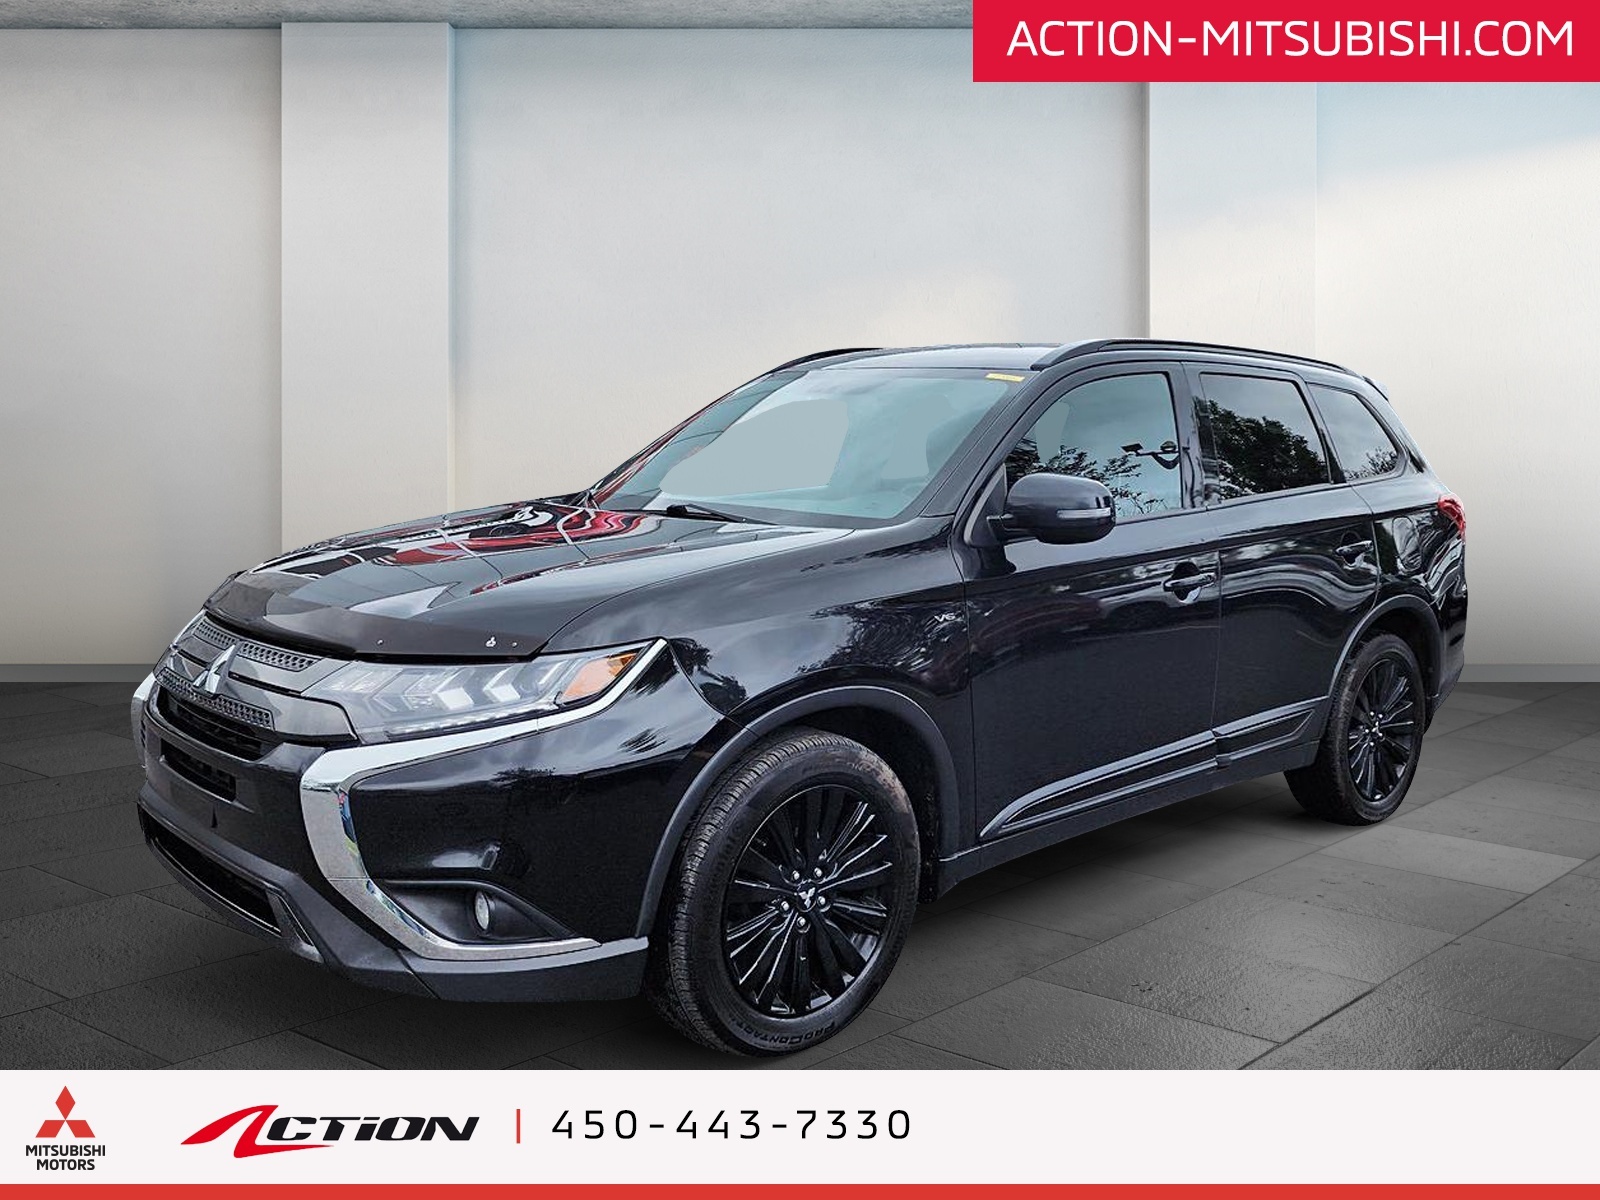 2020 Mitsubishi Outlander LIMITED EDITION V6 S-AWC, TOIT OUVRANT, 7 PLACES